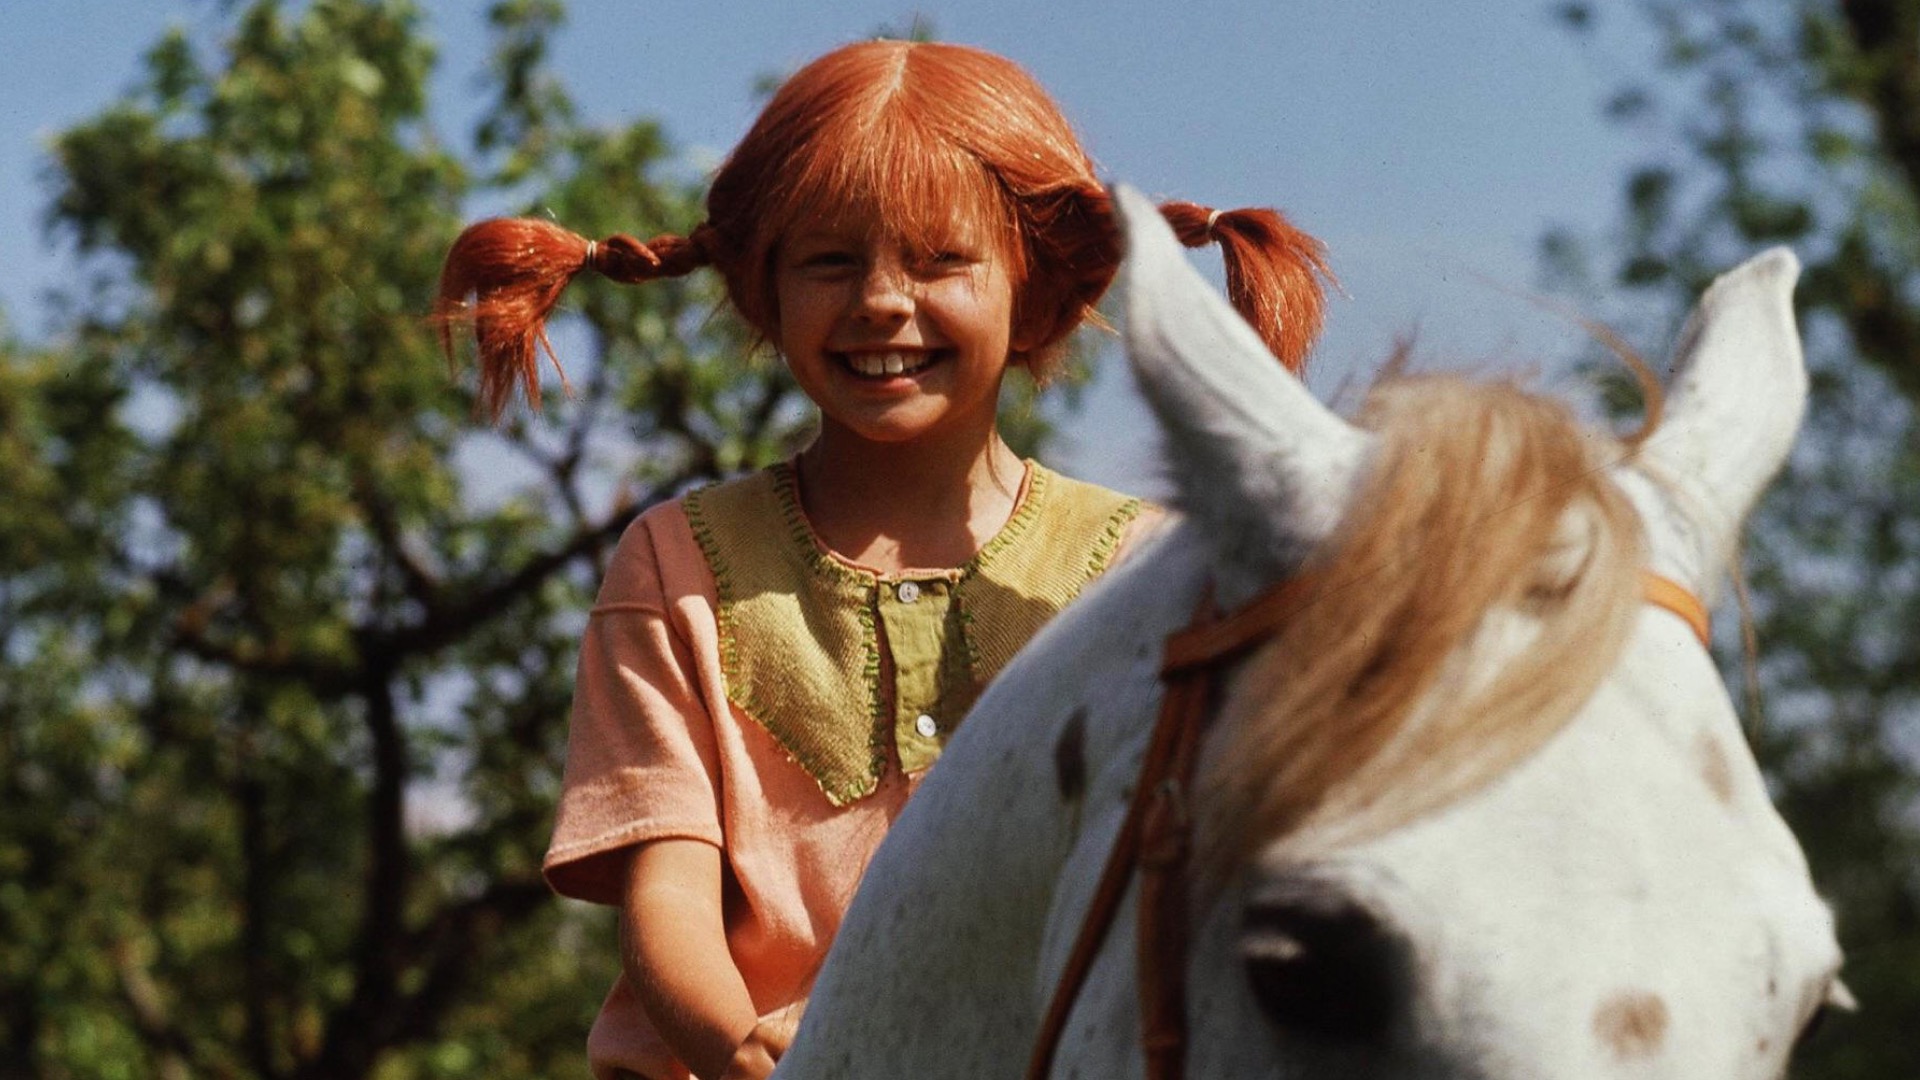 Flipboard: Children’s Classic Pippi Longstocking to Be Made Into a ...